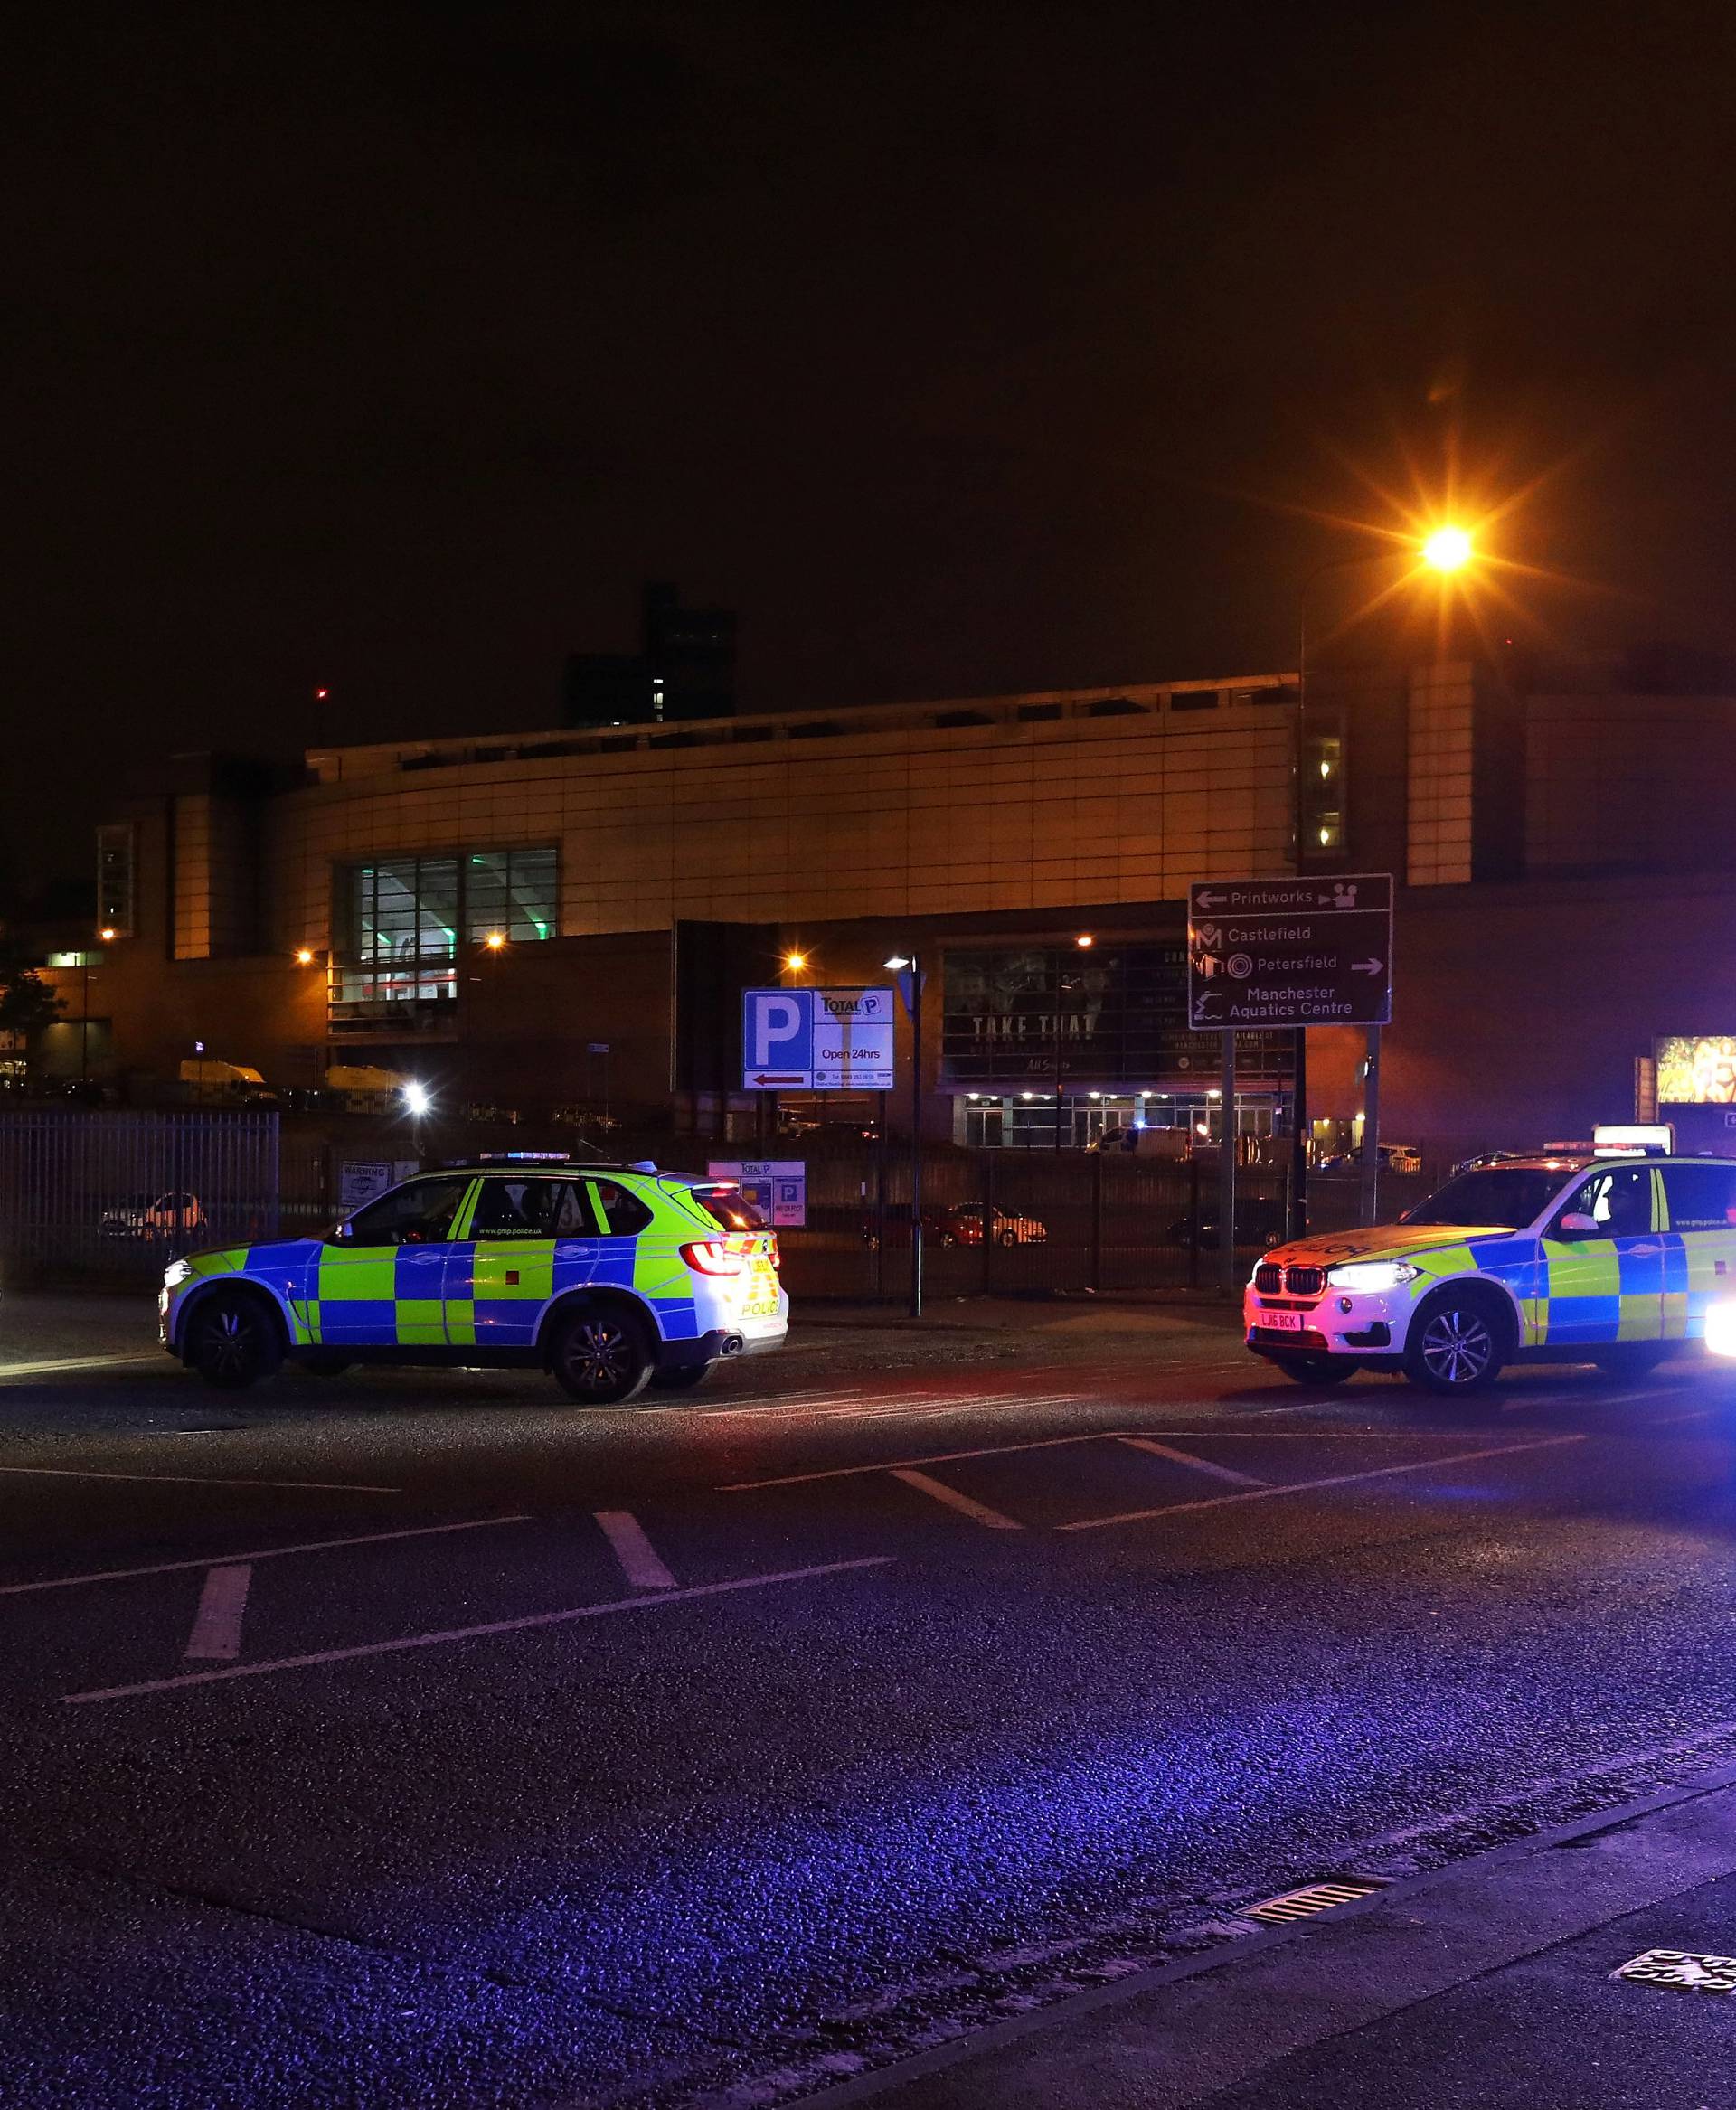 Police vehicles are seen outside the Manchester Arena, where U.S. singer Ariana Grande had been performing, in Manchester, northern England, Britain